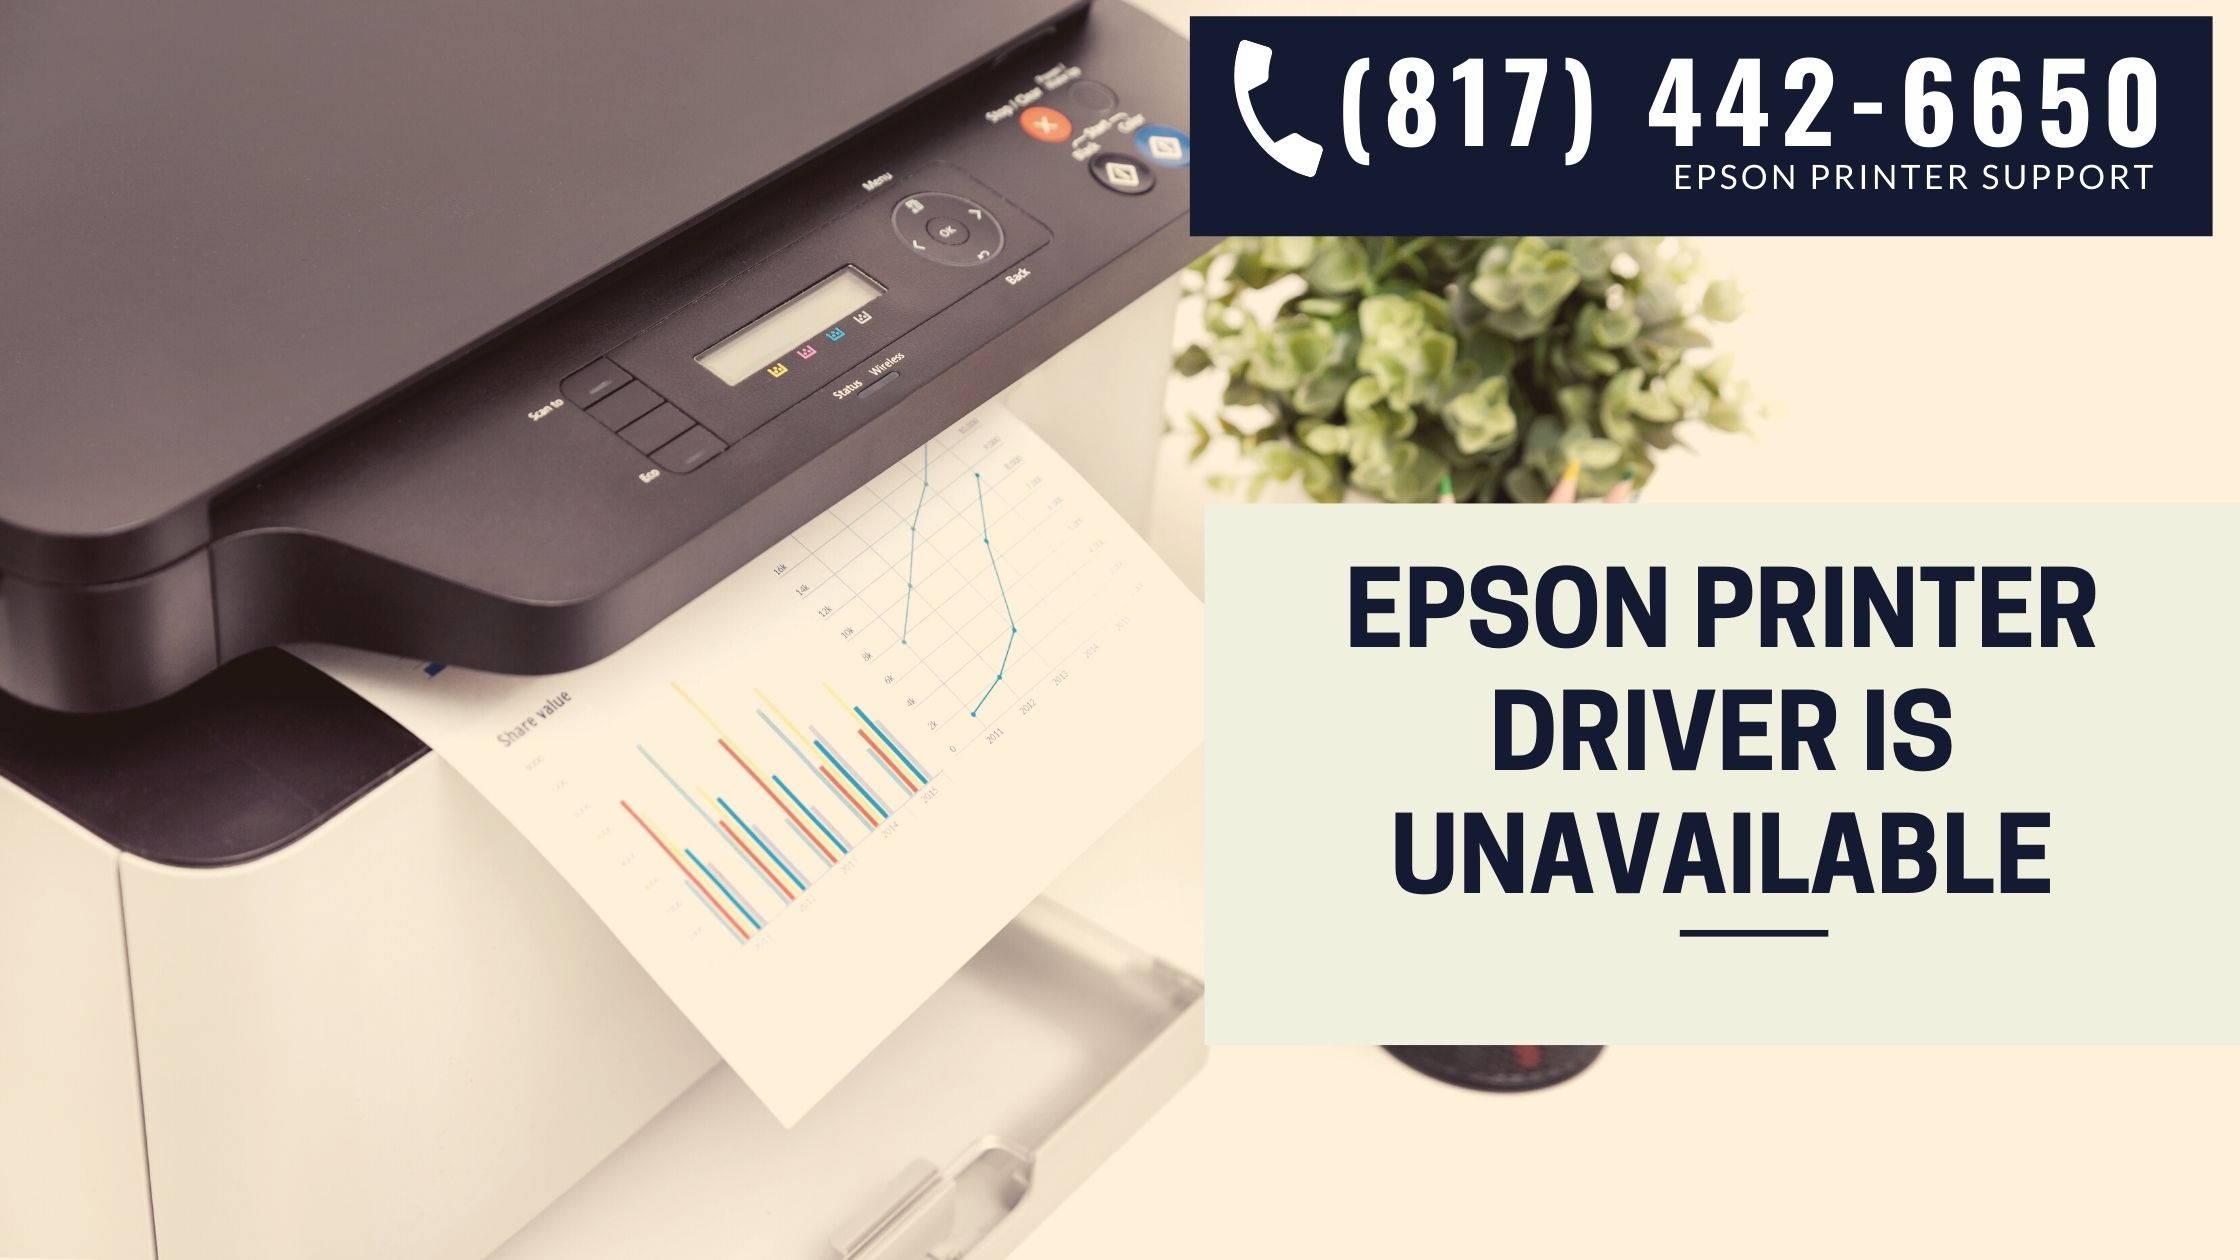 Epson printer driver is unavailable | (817) 442-6650